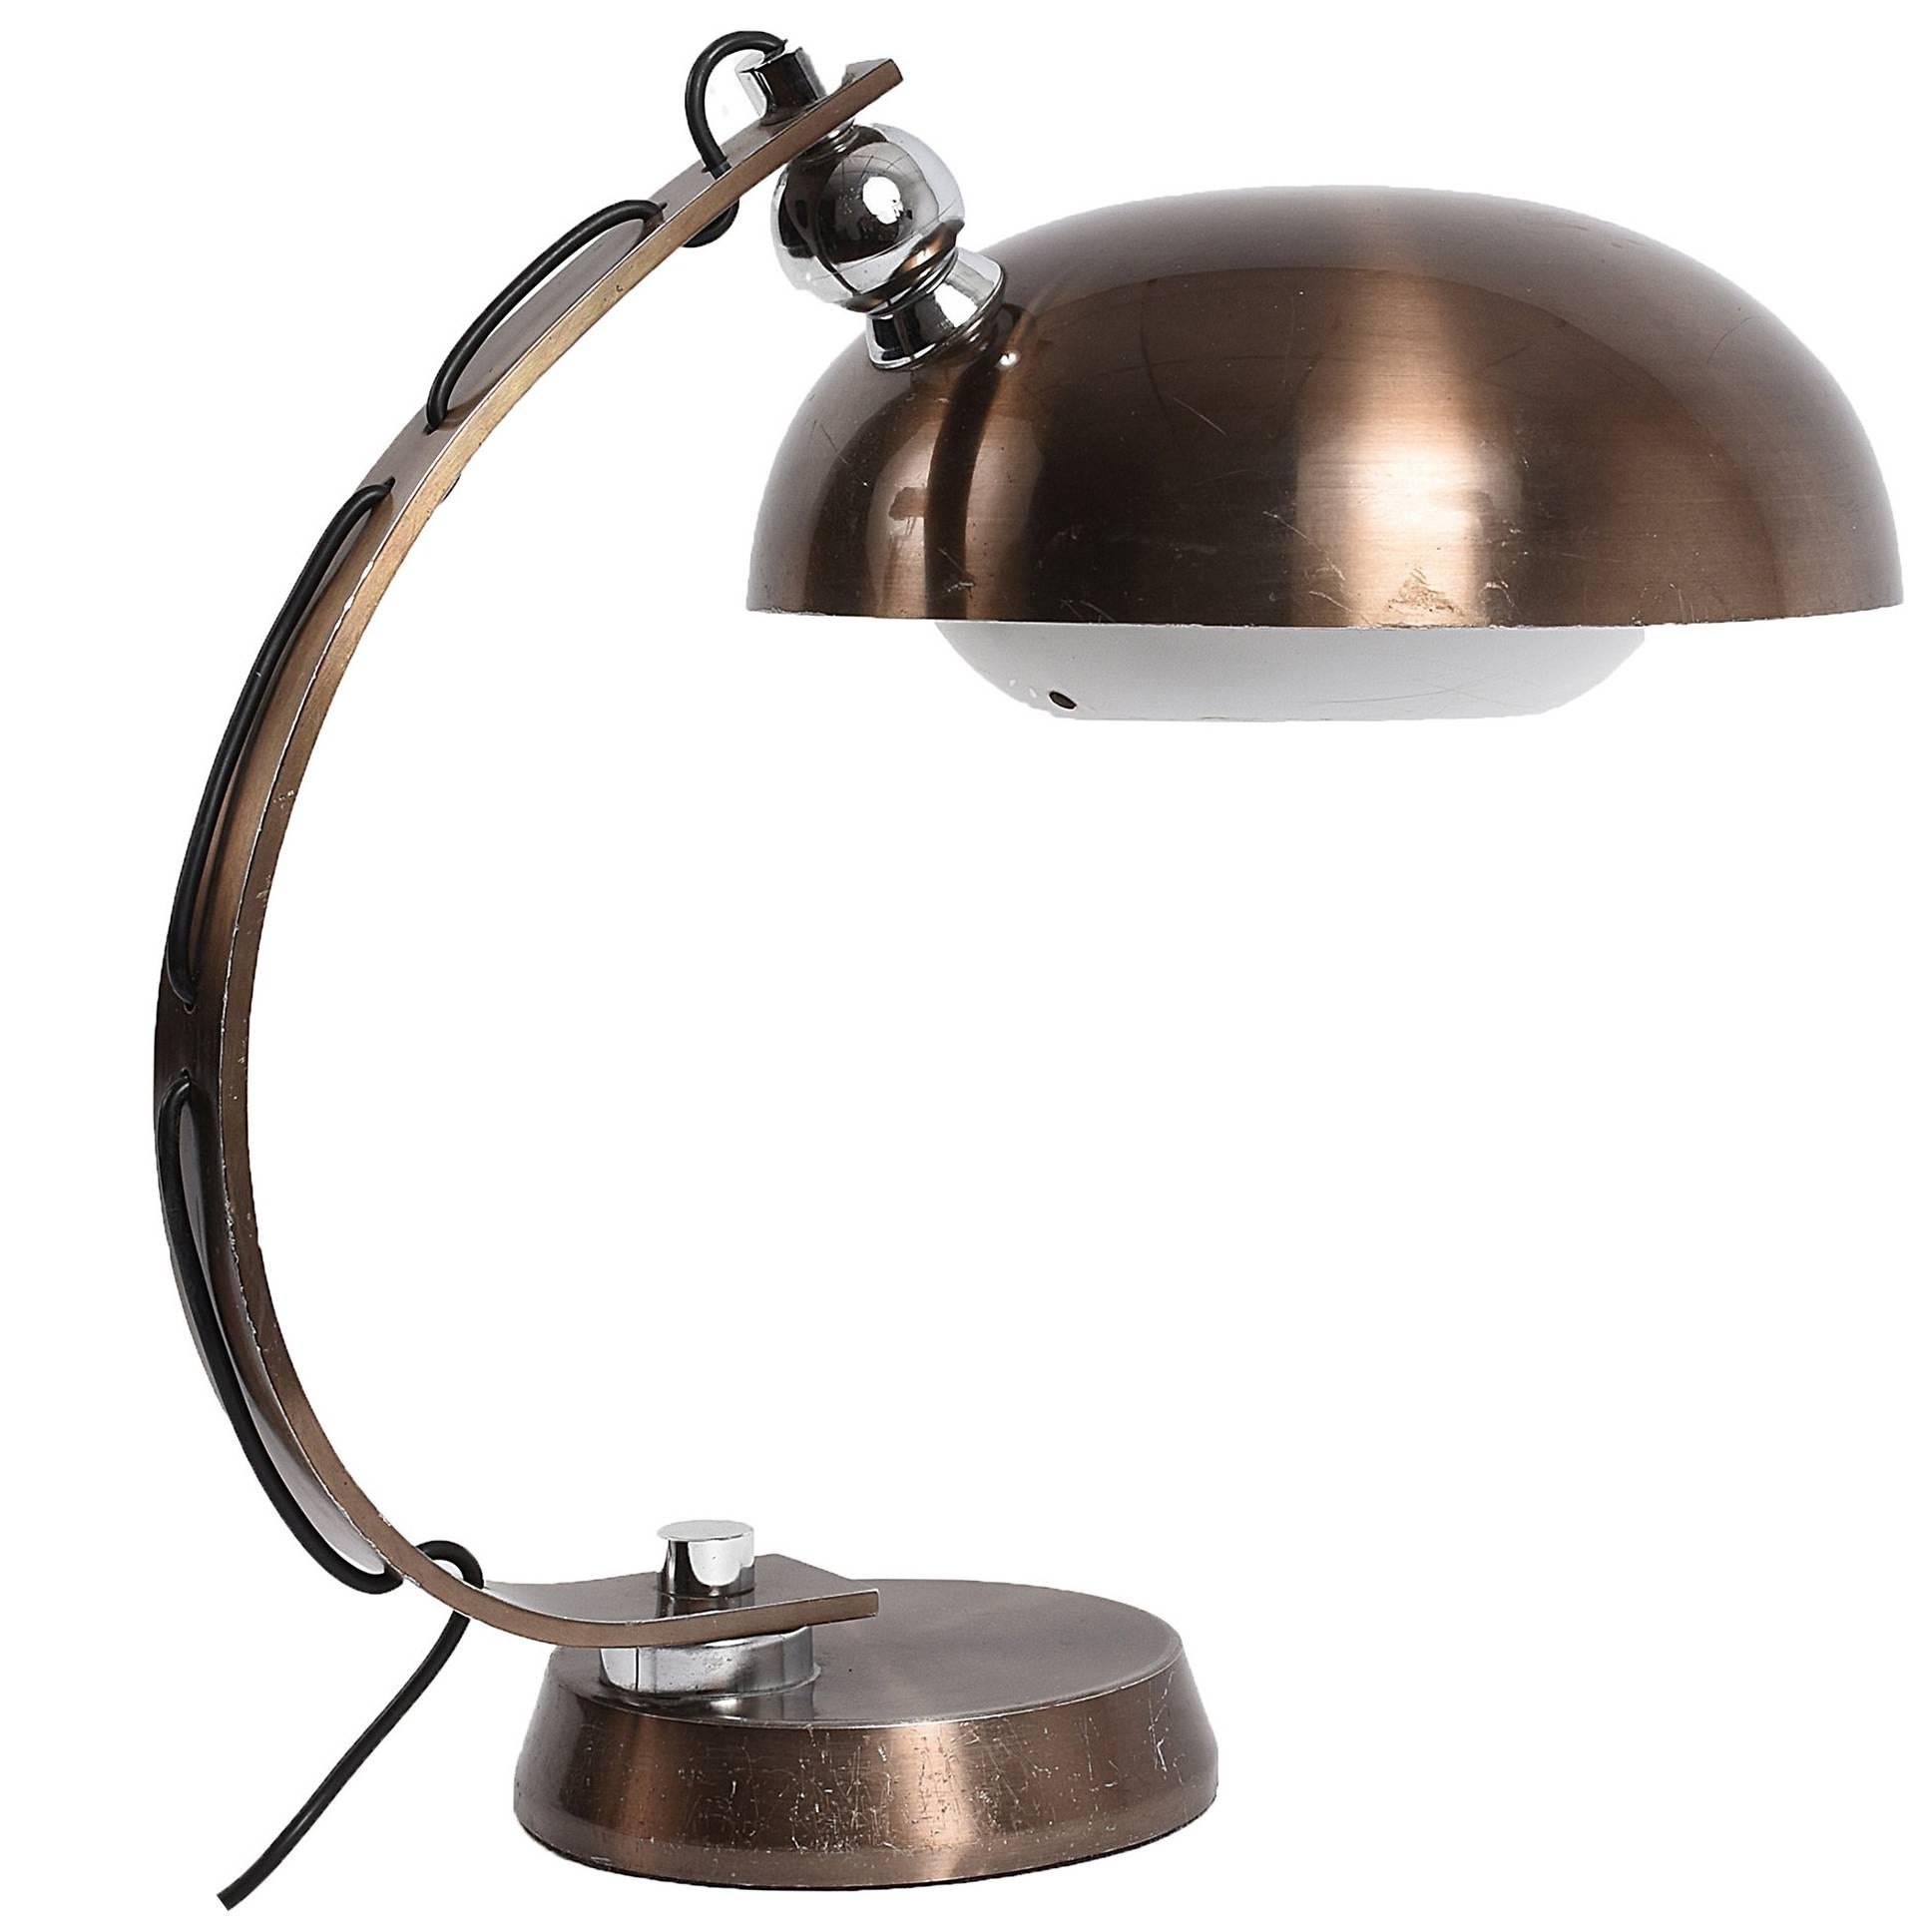 Beautiful midcentury and large table lamp attributed to Arredoluce. The lampshade is adjustable and in an exquisite bronzed aluminum, typical of the lighting productions during the 70s.

For this incredible item, the patina gives a wonderful touch